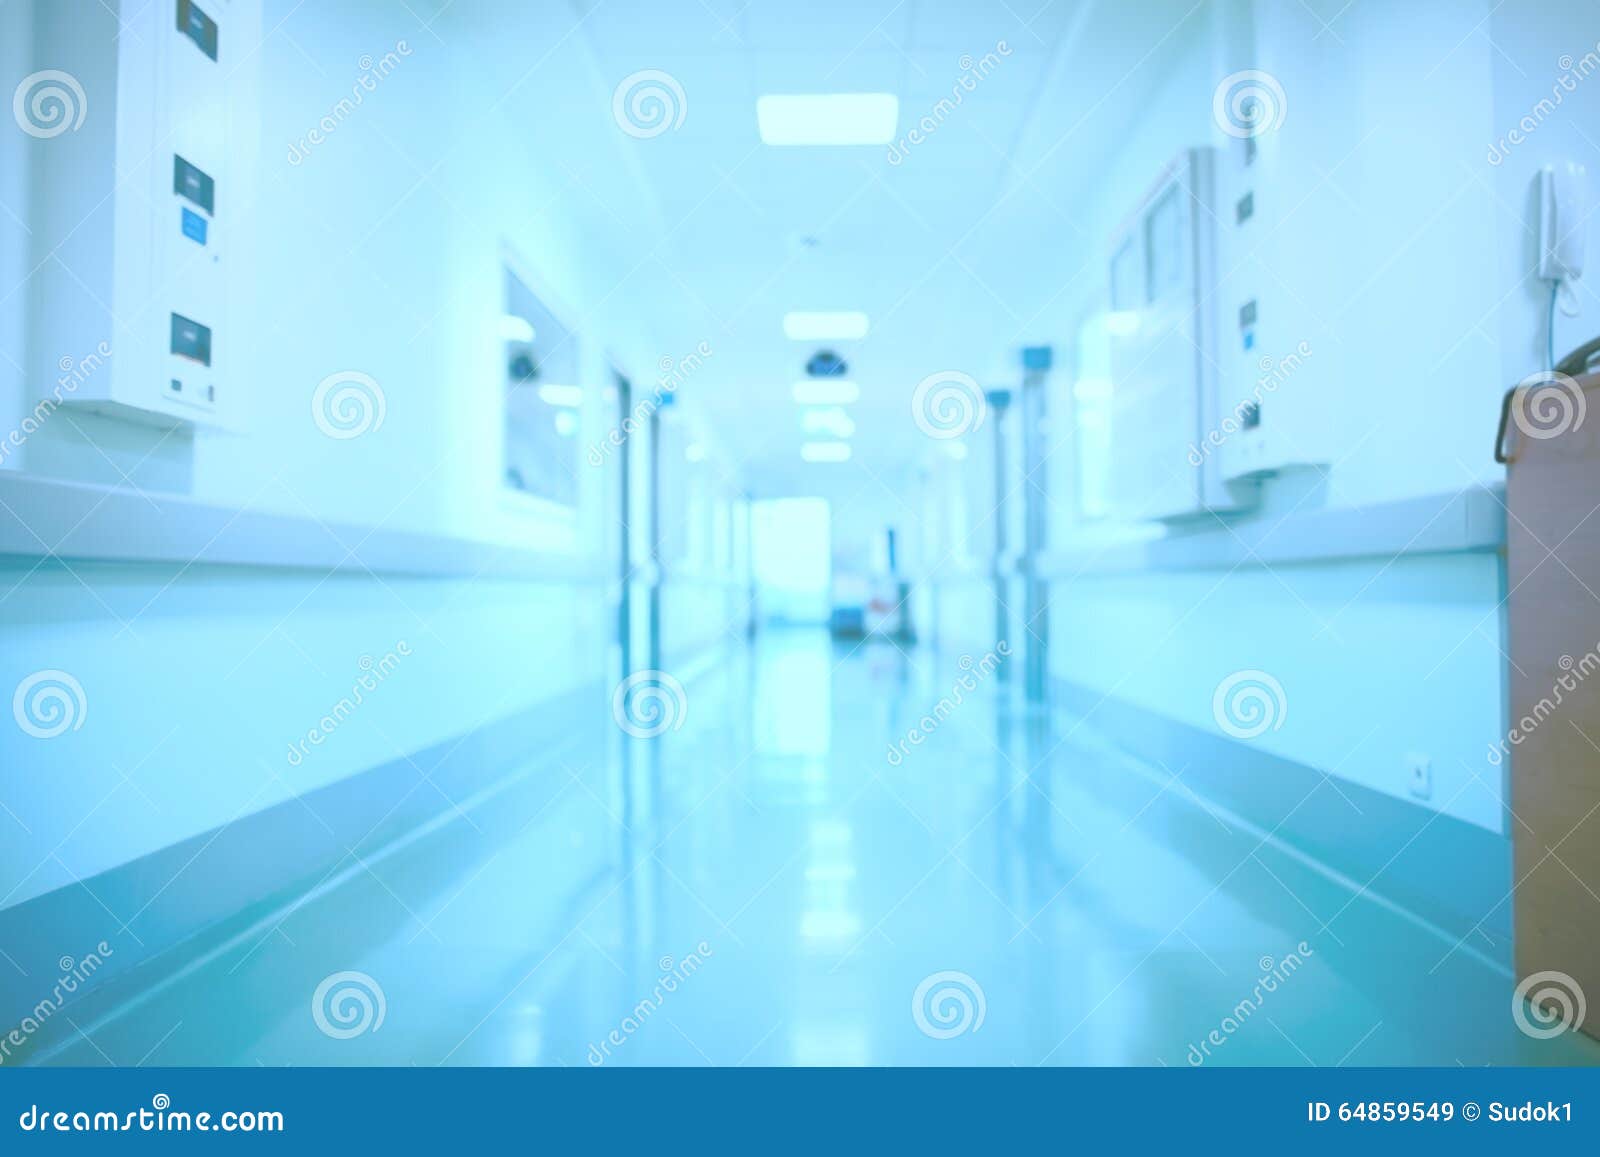 Blurred Hospital Interior As A Medical Background Stock Photo 64859549 -  Megapixl